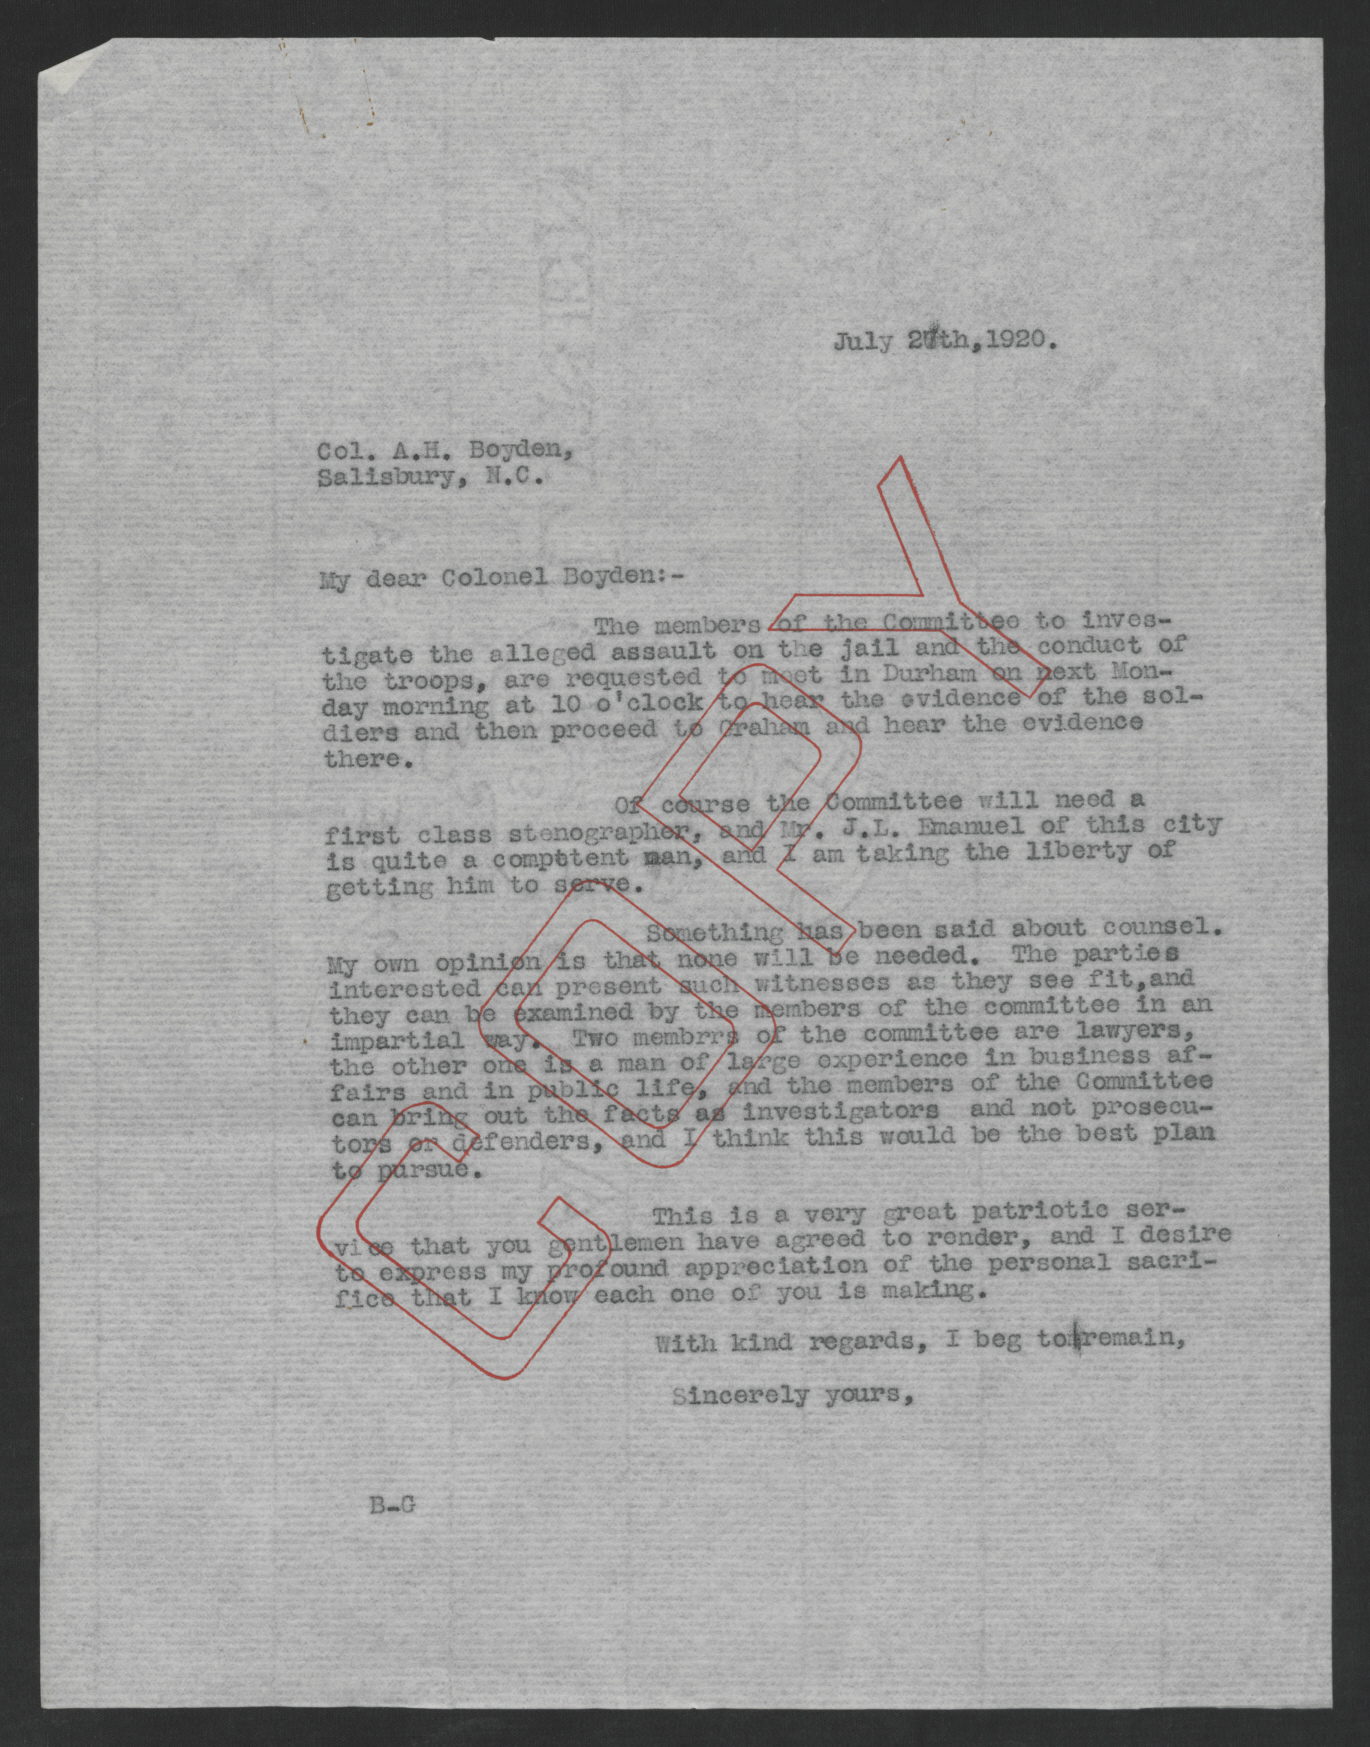 Letter from Thomas W. Bickett to Archibald H. Boyden, July 27, 1920